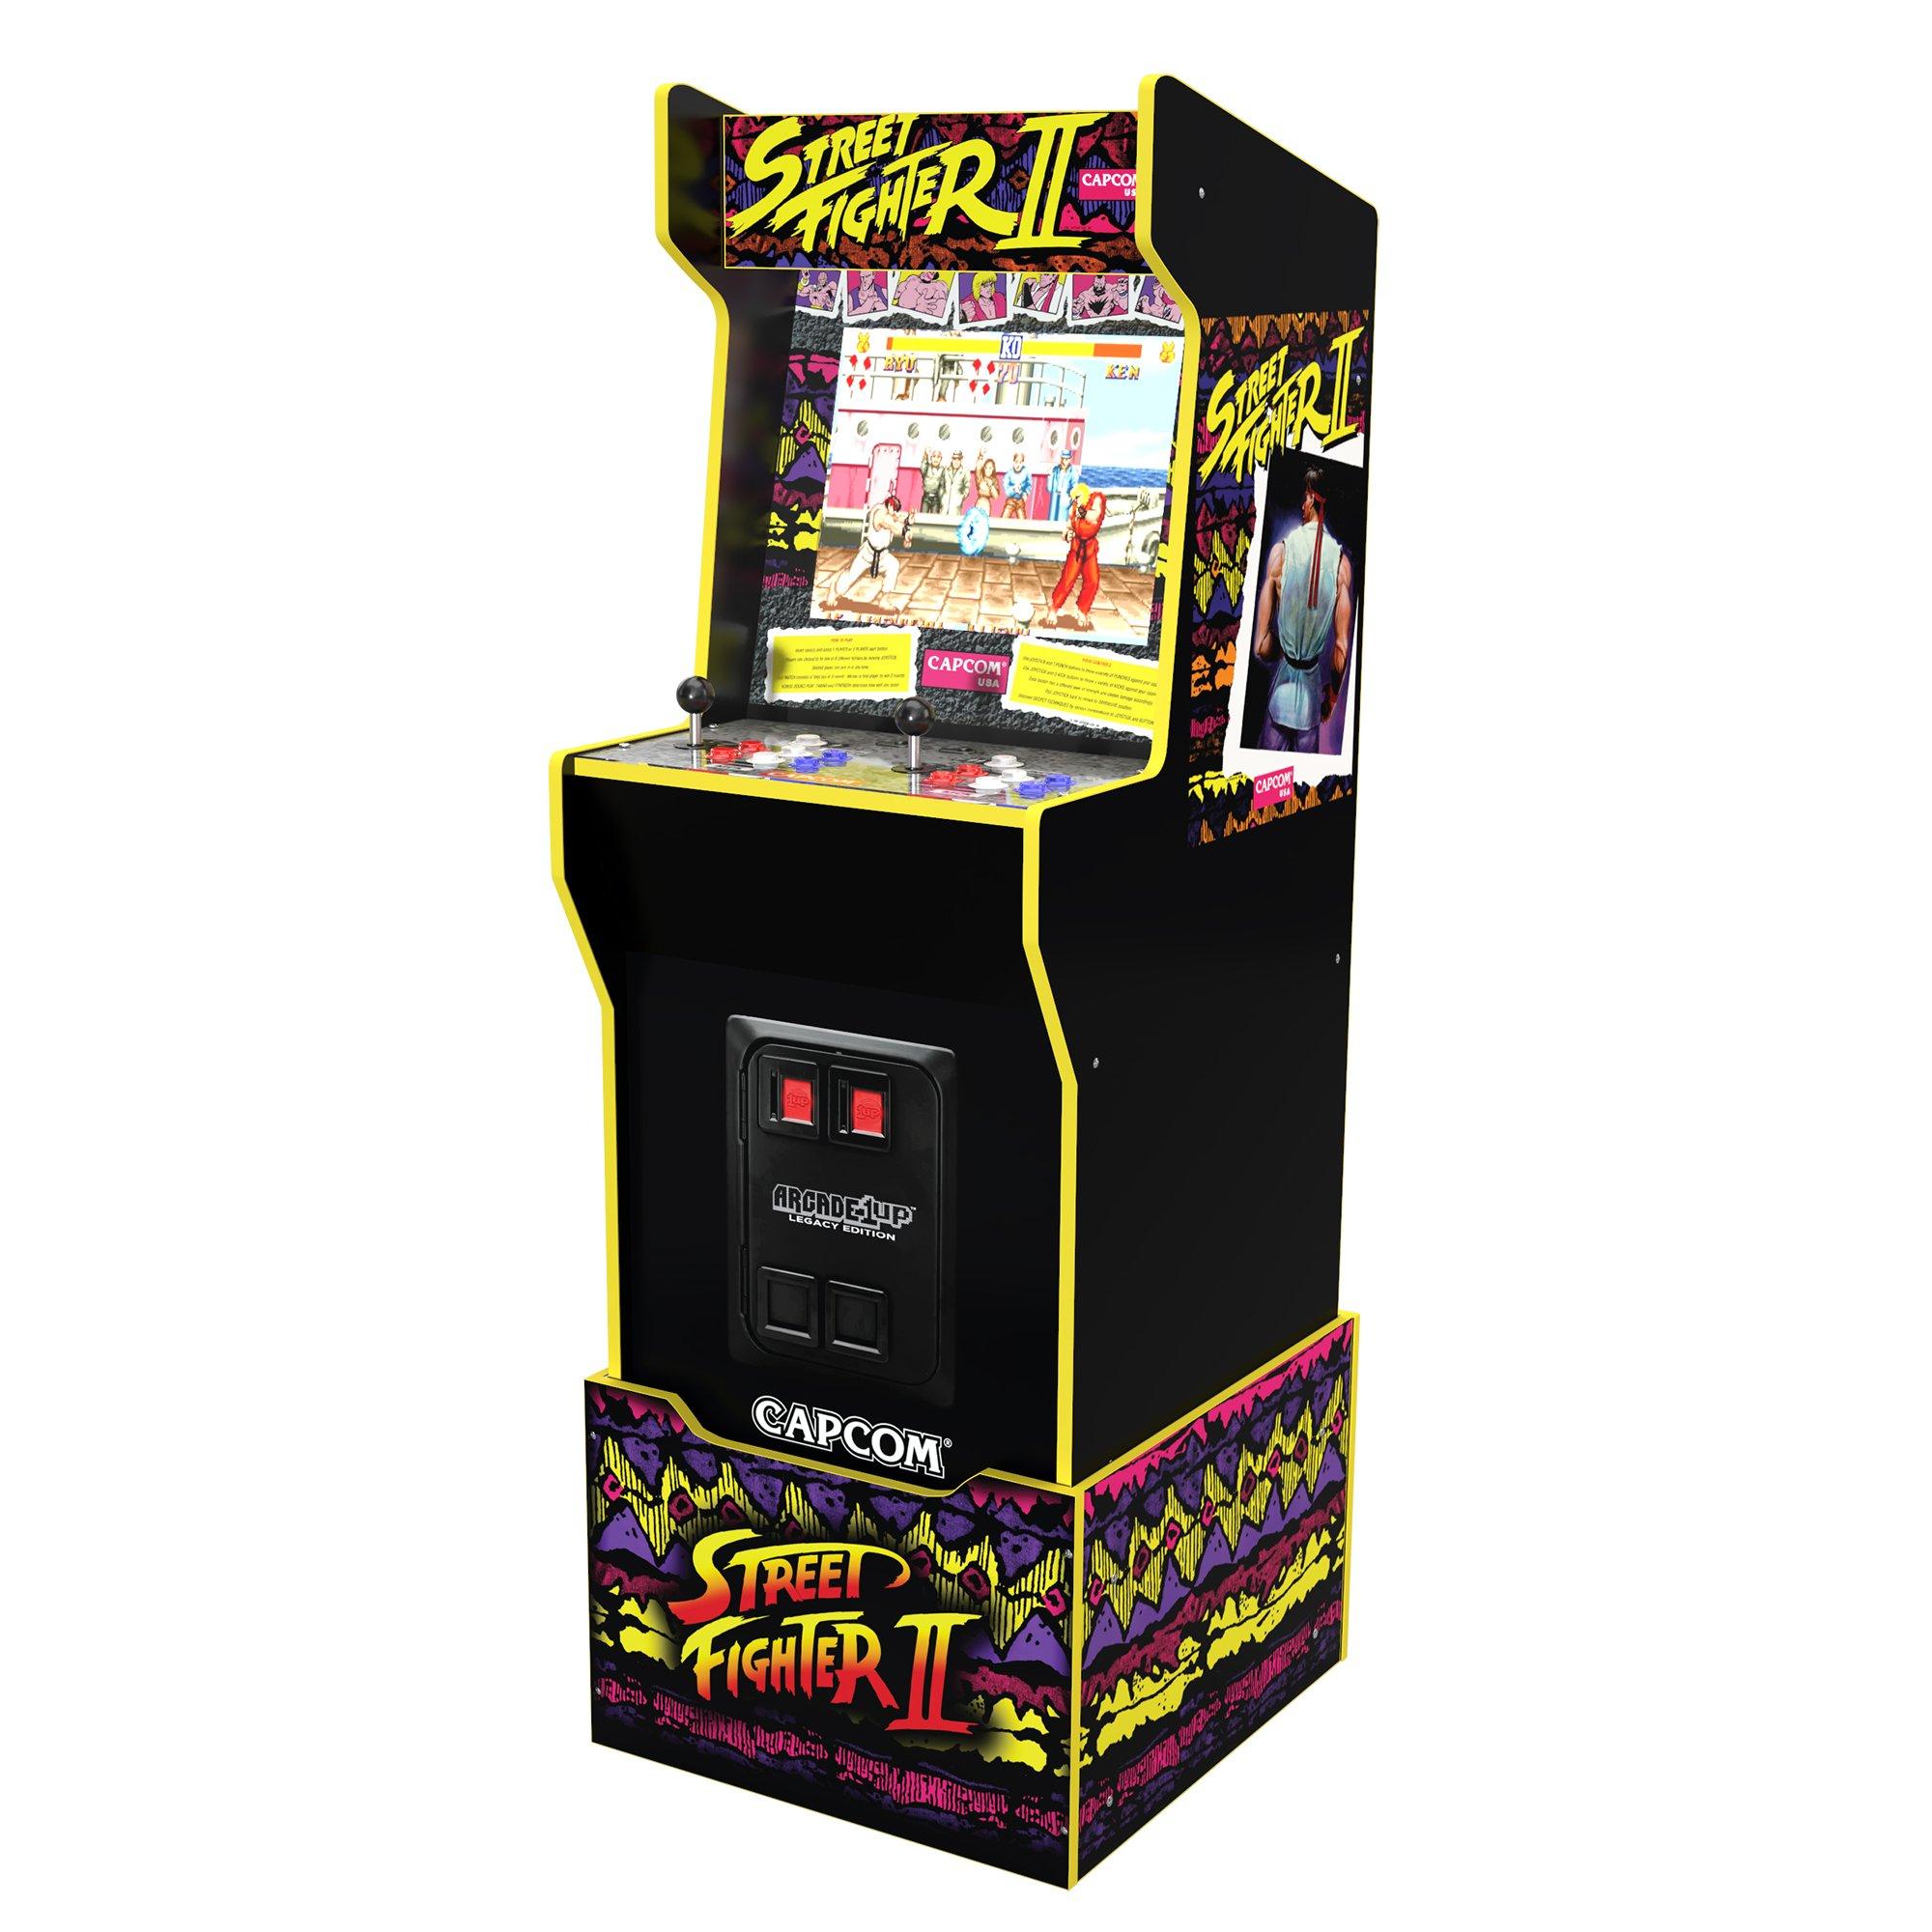 Arcade1Up Capcom Game Cabinet with Riser Legacy Edition | GameStop